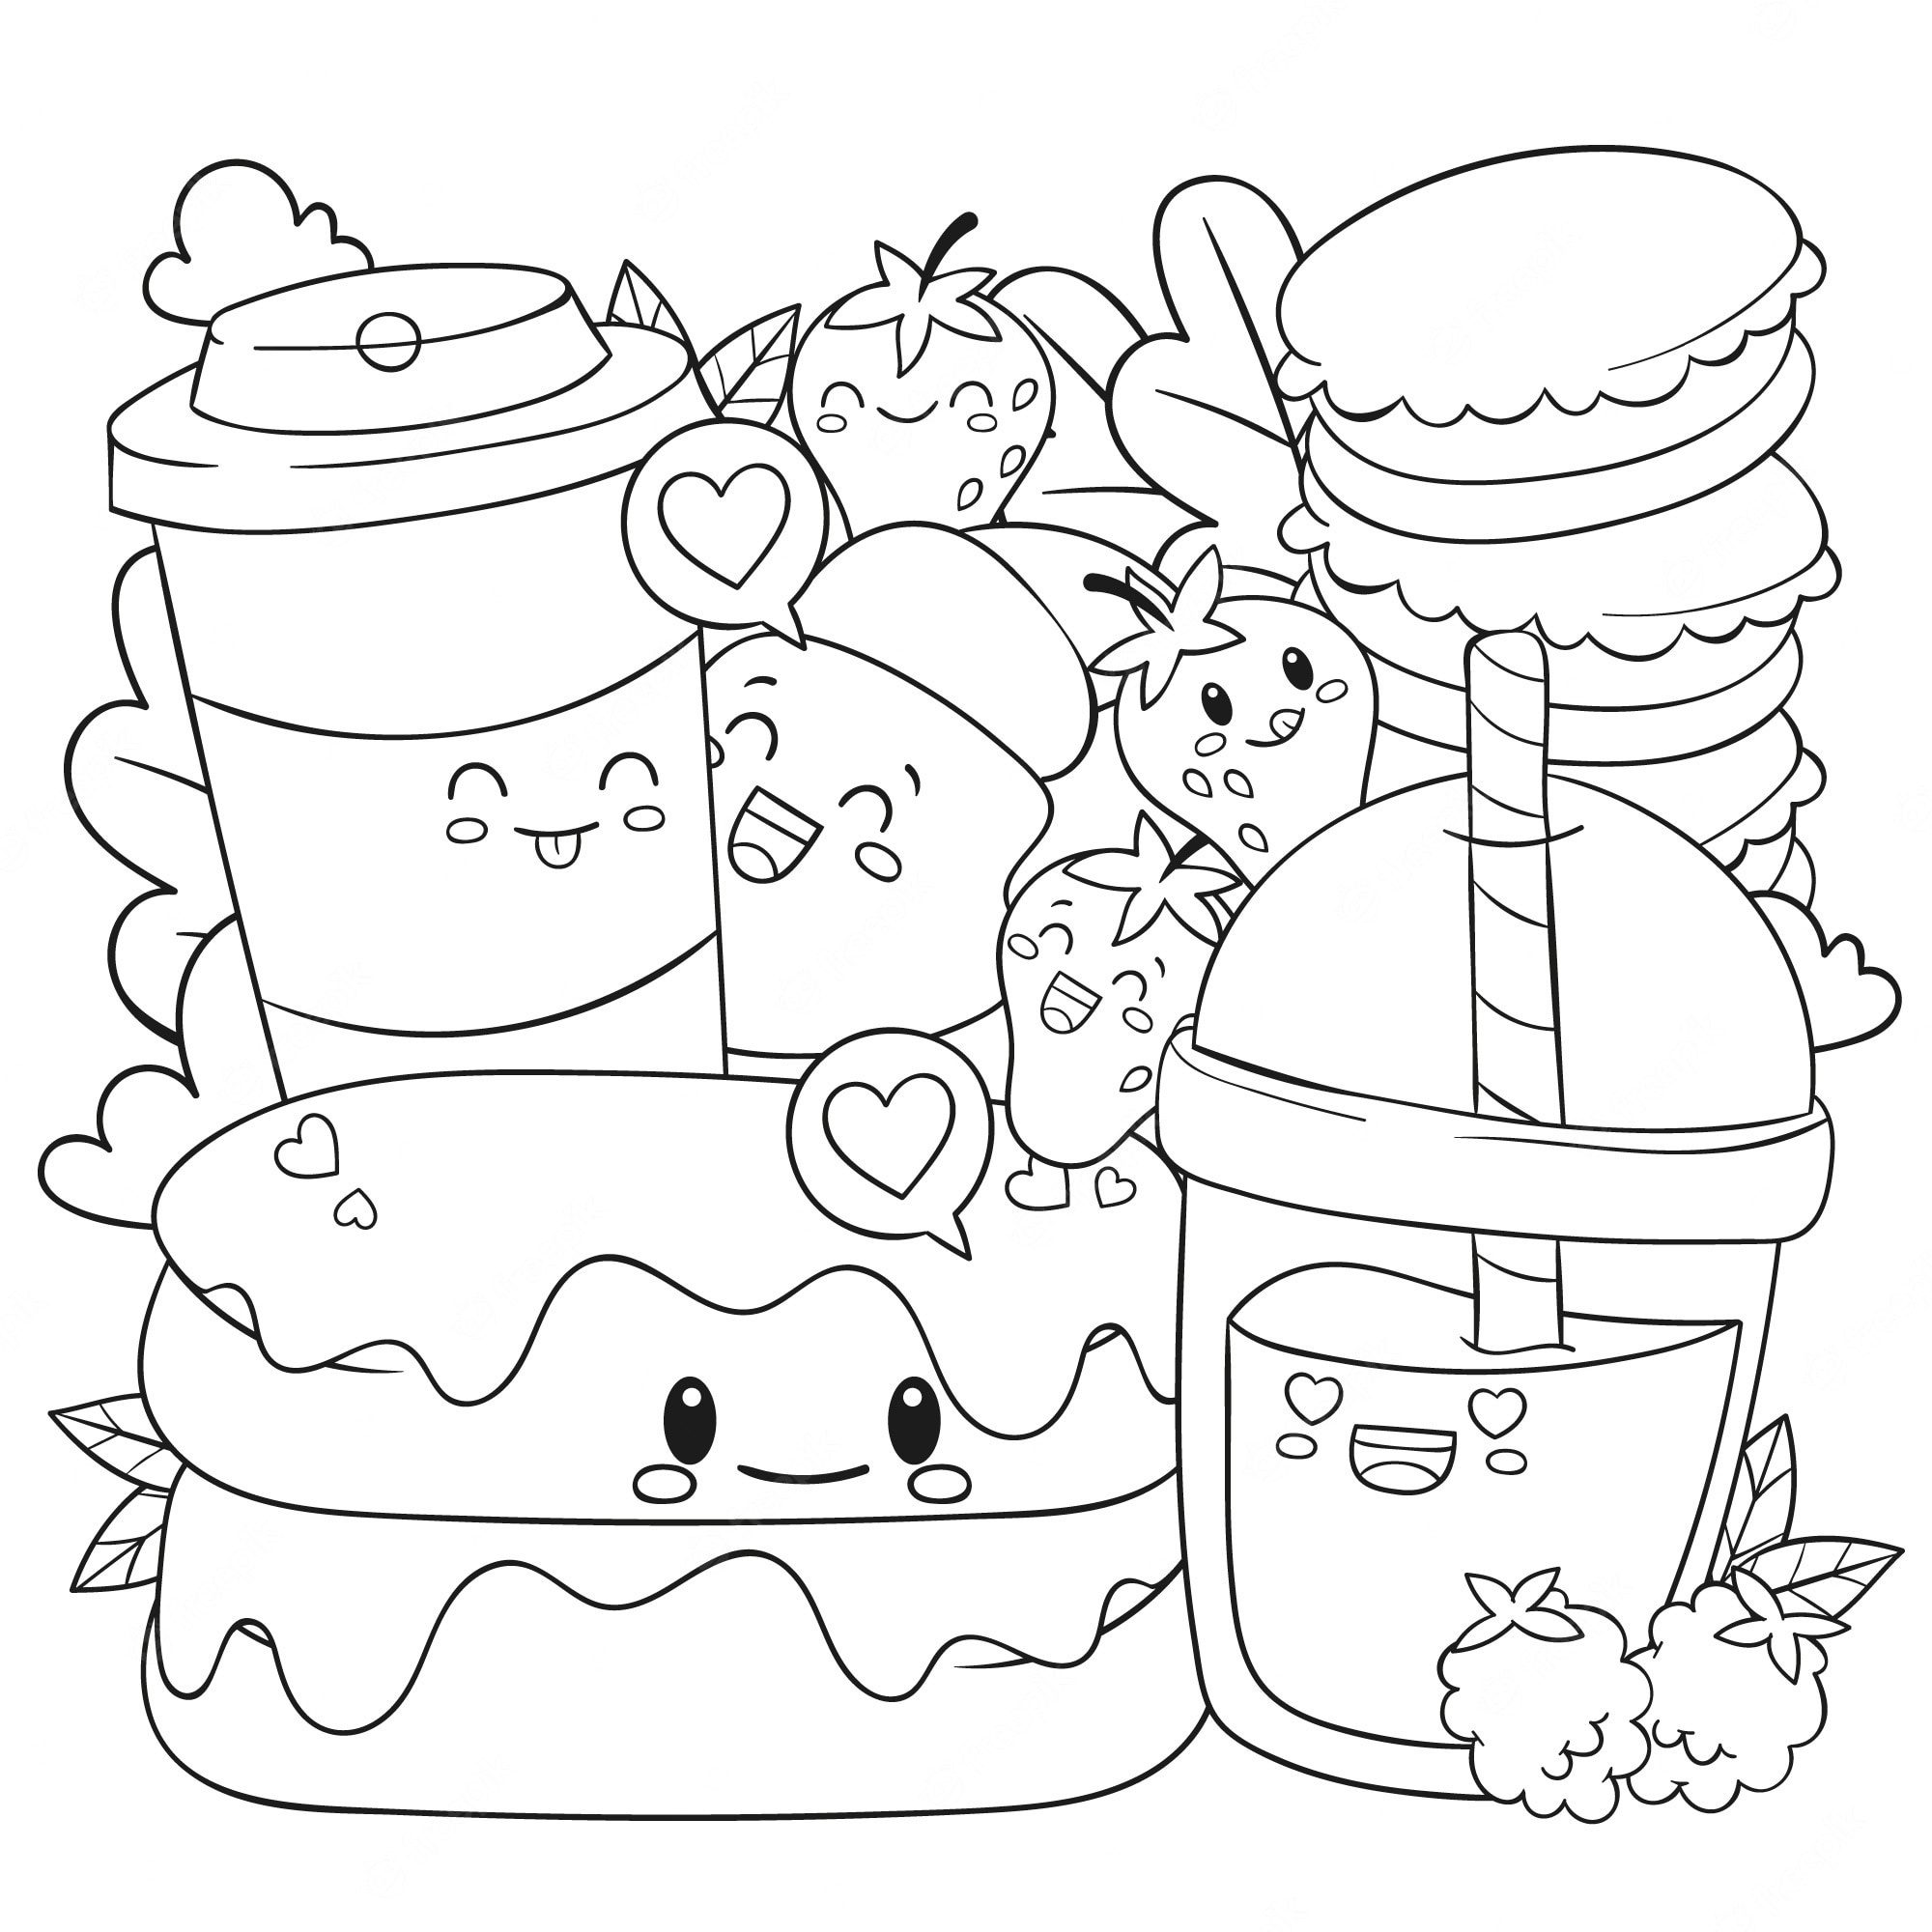 Food Coloring Page Image - Coloring Home